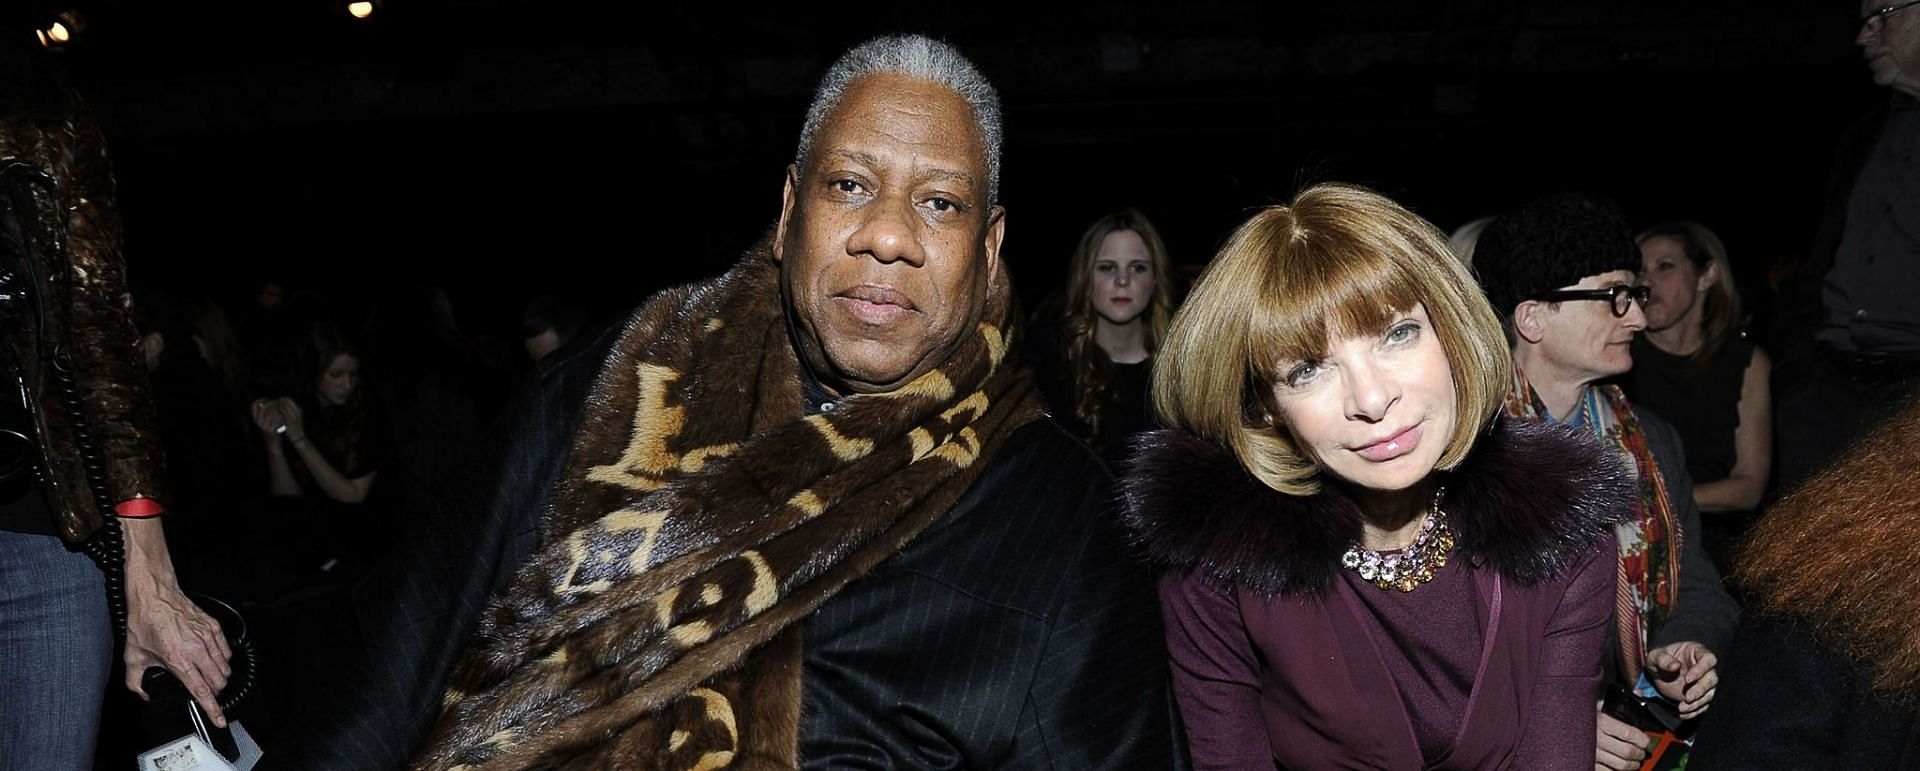 Anna Wintour and Andre Leon Talley (Image via Eugene Gologursky/WireImage)